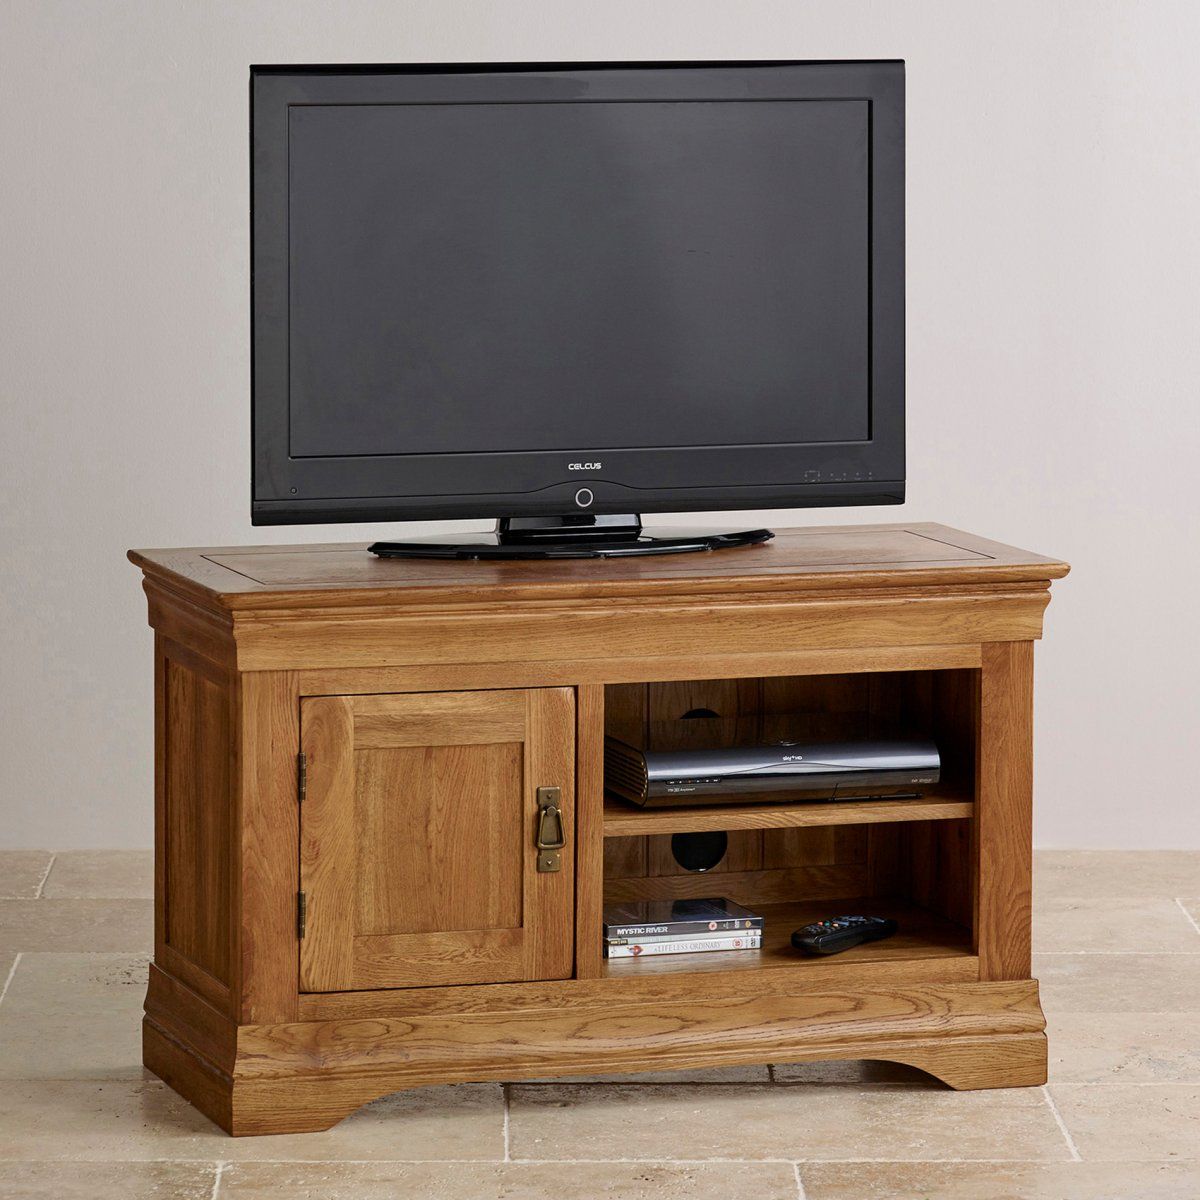 French Farmhouse Tv Cabinet | Solid Oak | Oak Furniture Land Within Small Tv Stands For Top Of Dresser (View 7 of 15)